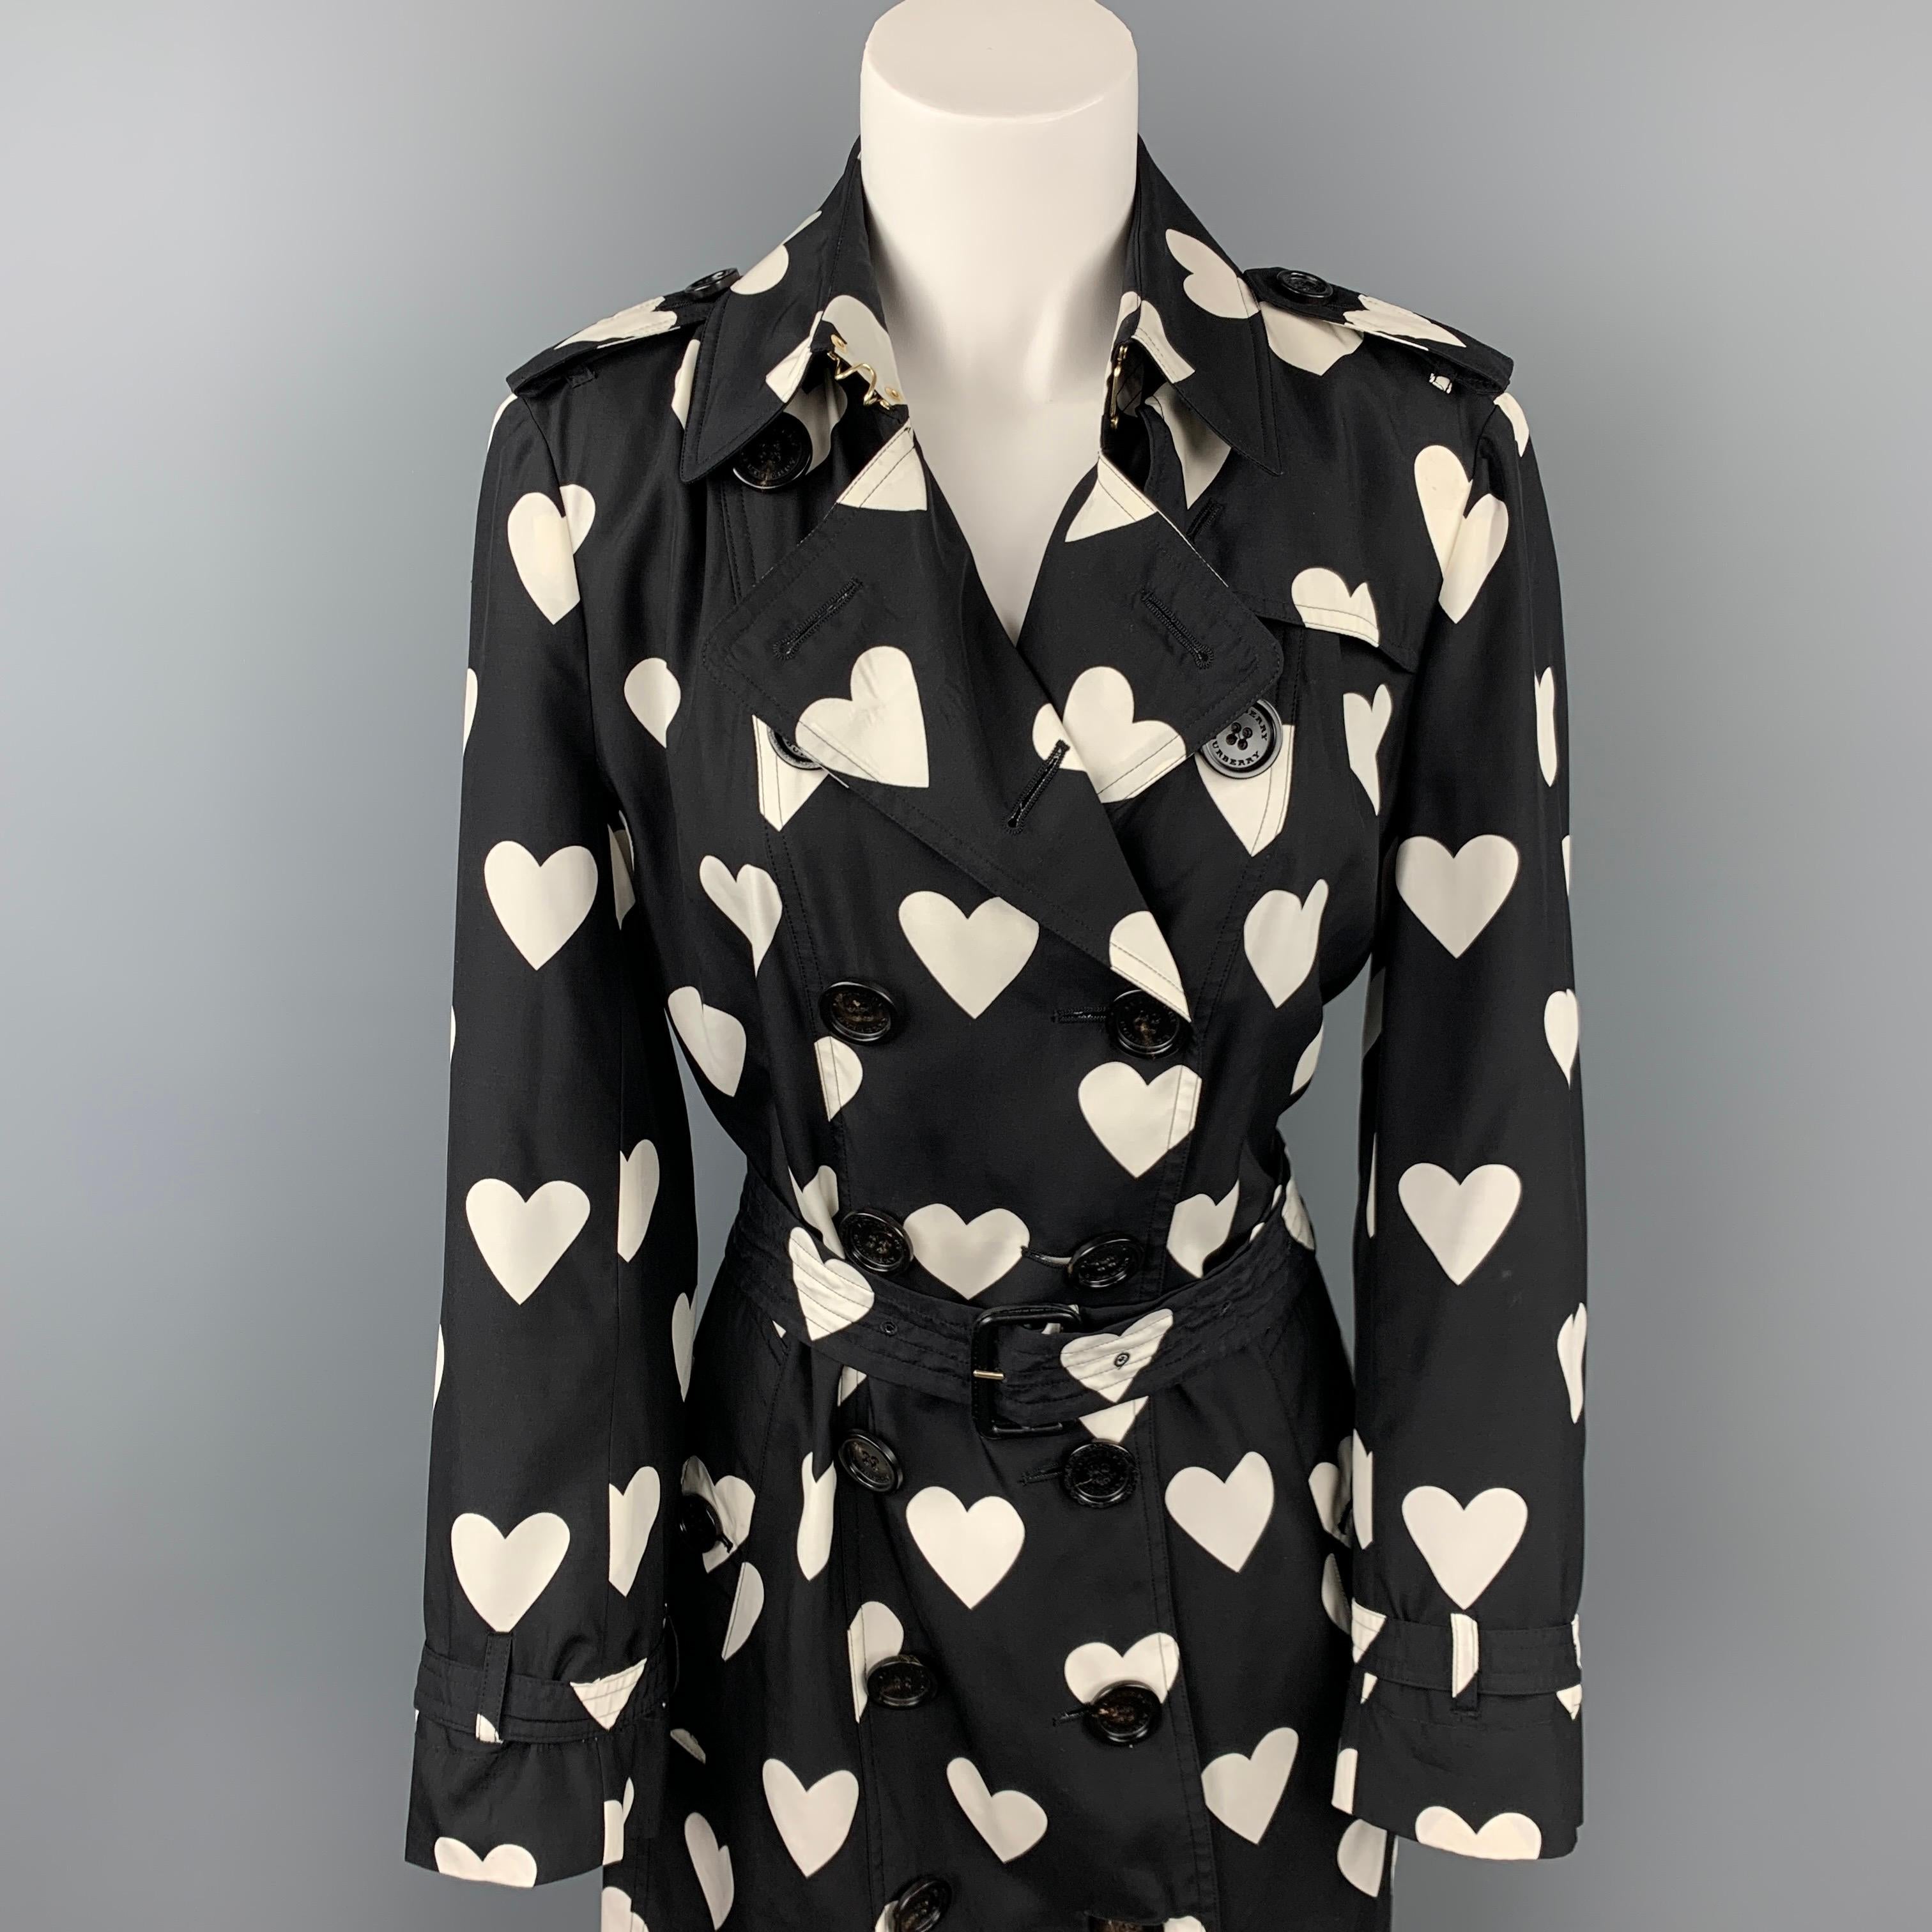 BURBERRY LONDON trench coat comes in a black & white heart print silk / wool with a full liner featuring a belted style, epaulettes, buttoned pockets, hook & loop collar detail, and a double breasted closure. Made in Poland. 

Very Good Pre-Owned